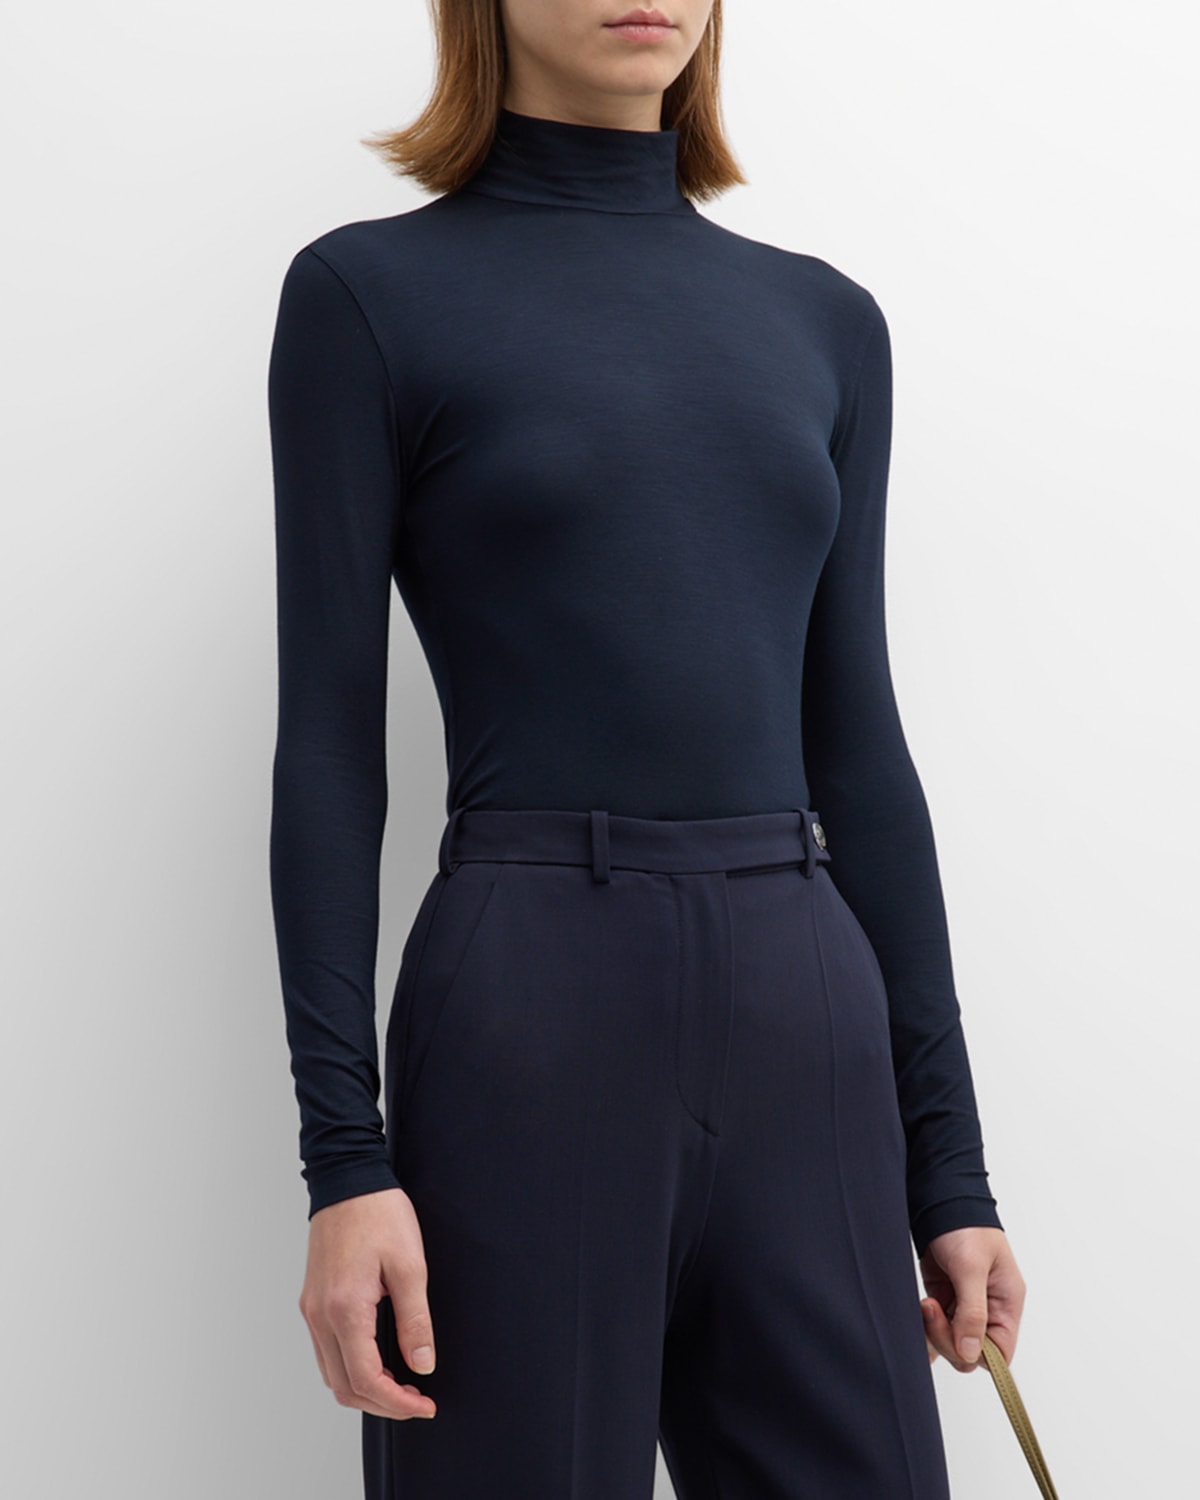 AKRIS PUNTO MOCK NECK FITTED SWEATER